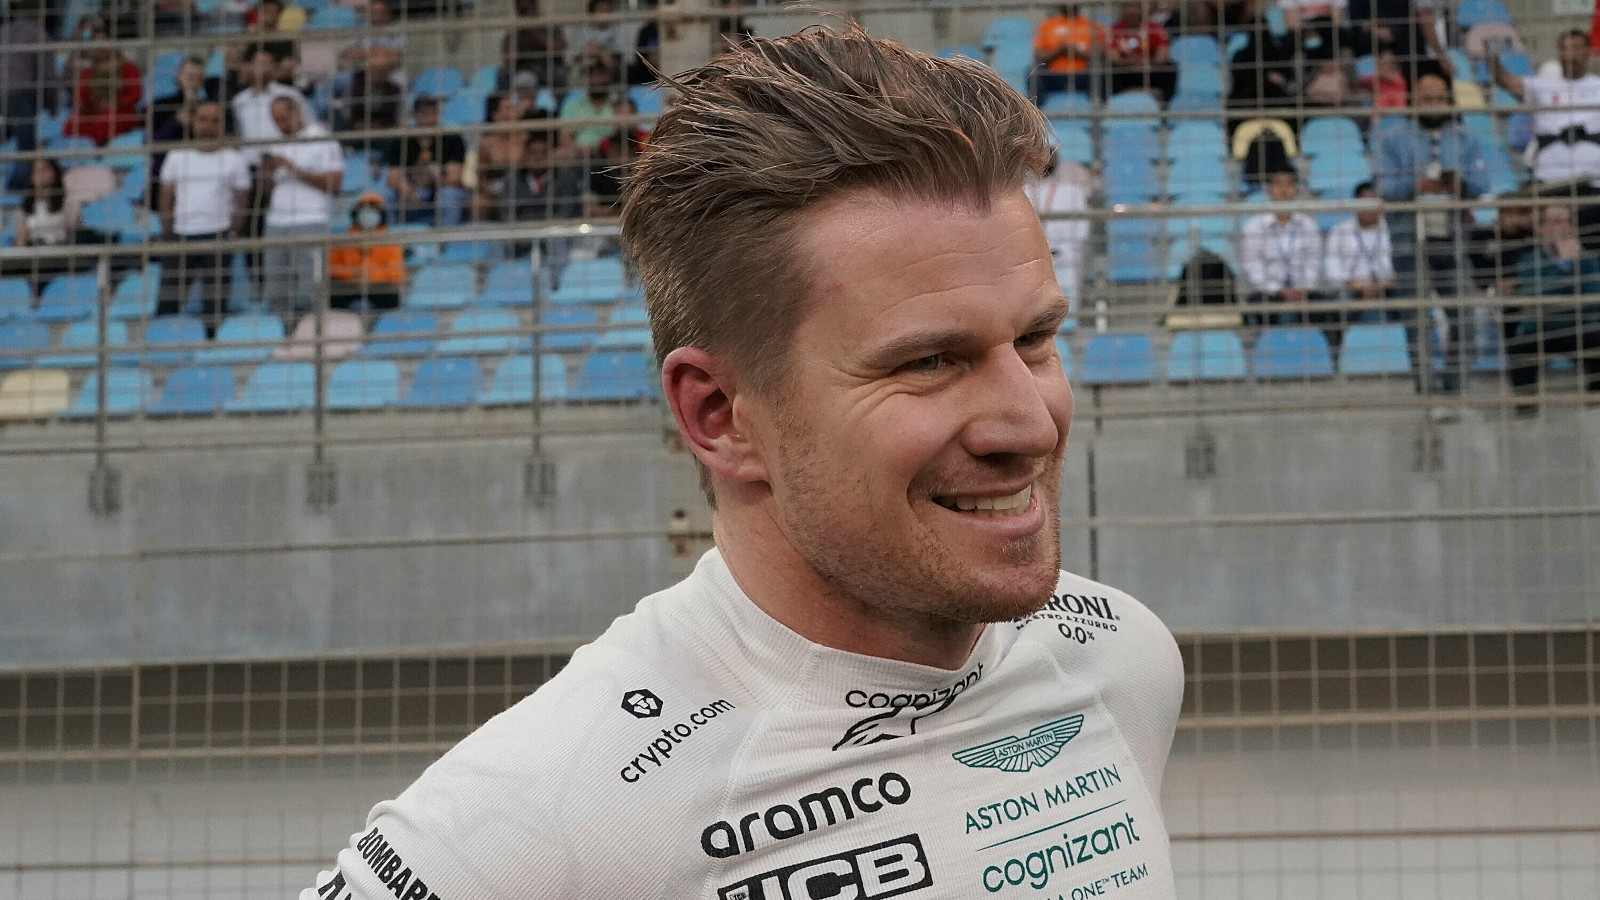 Nico Hulkenberg standing on the grid before the race. Bahrain March 2022